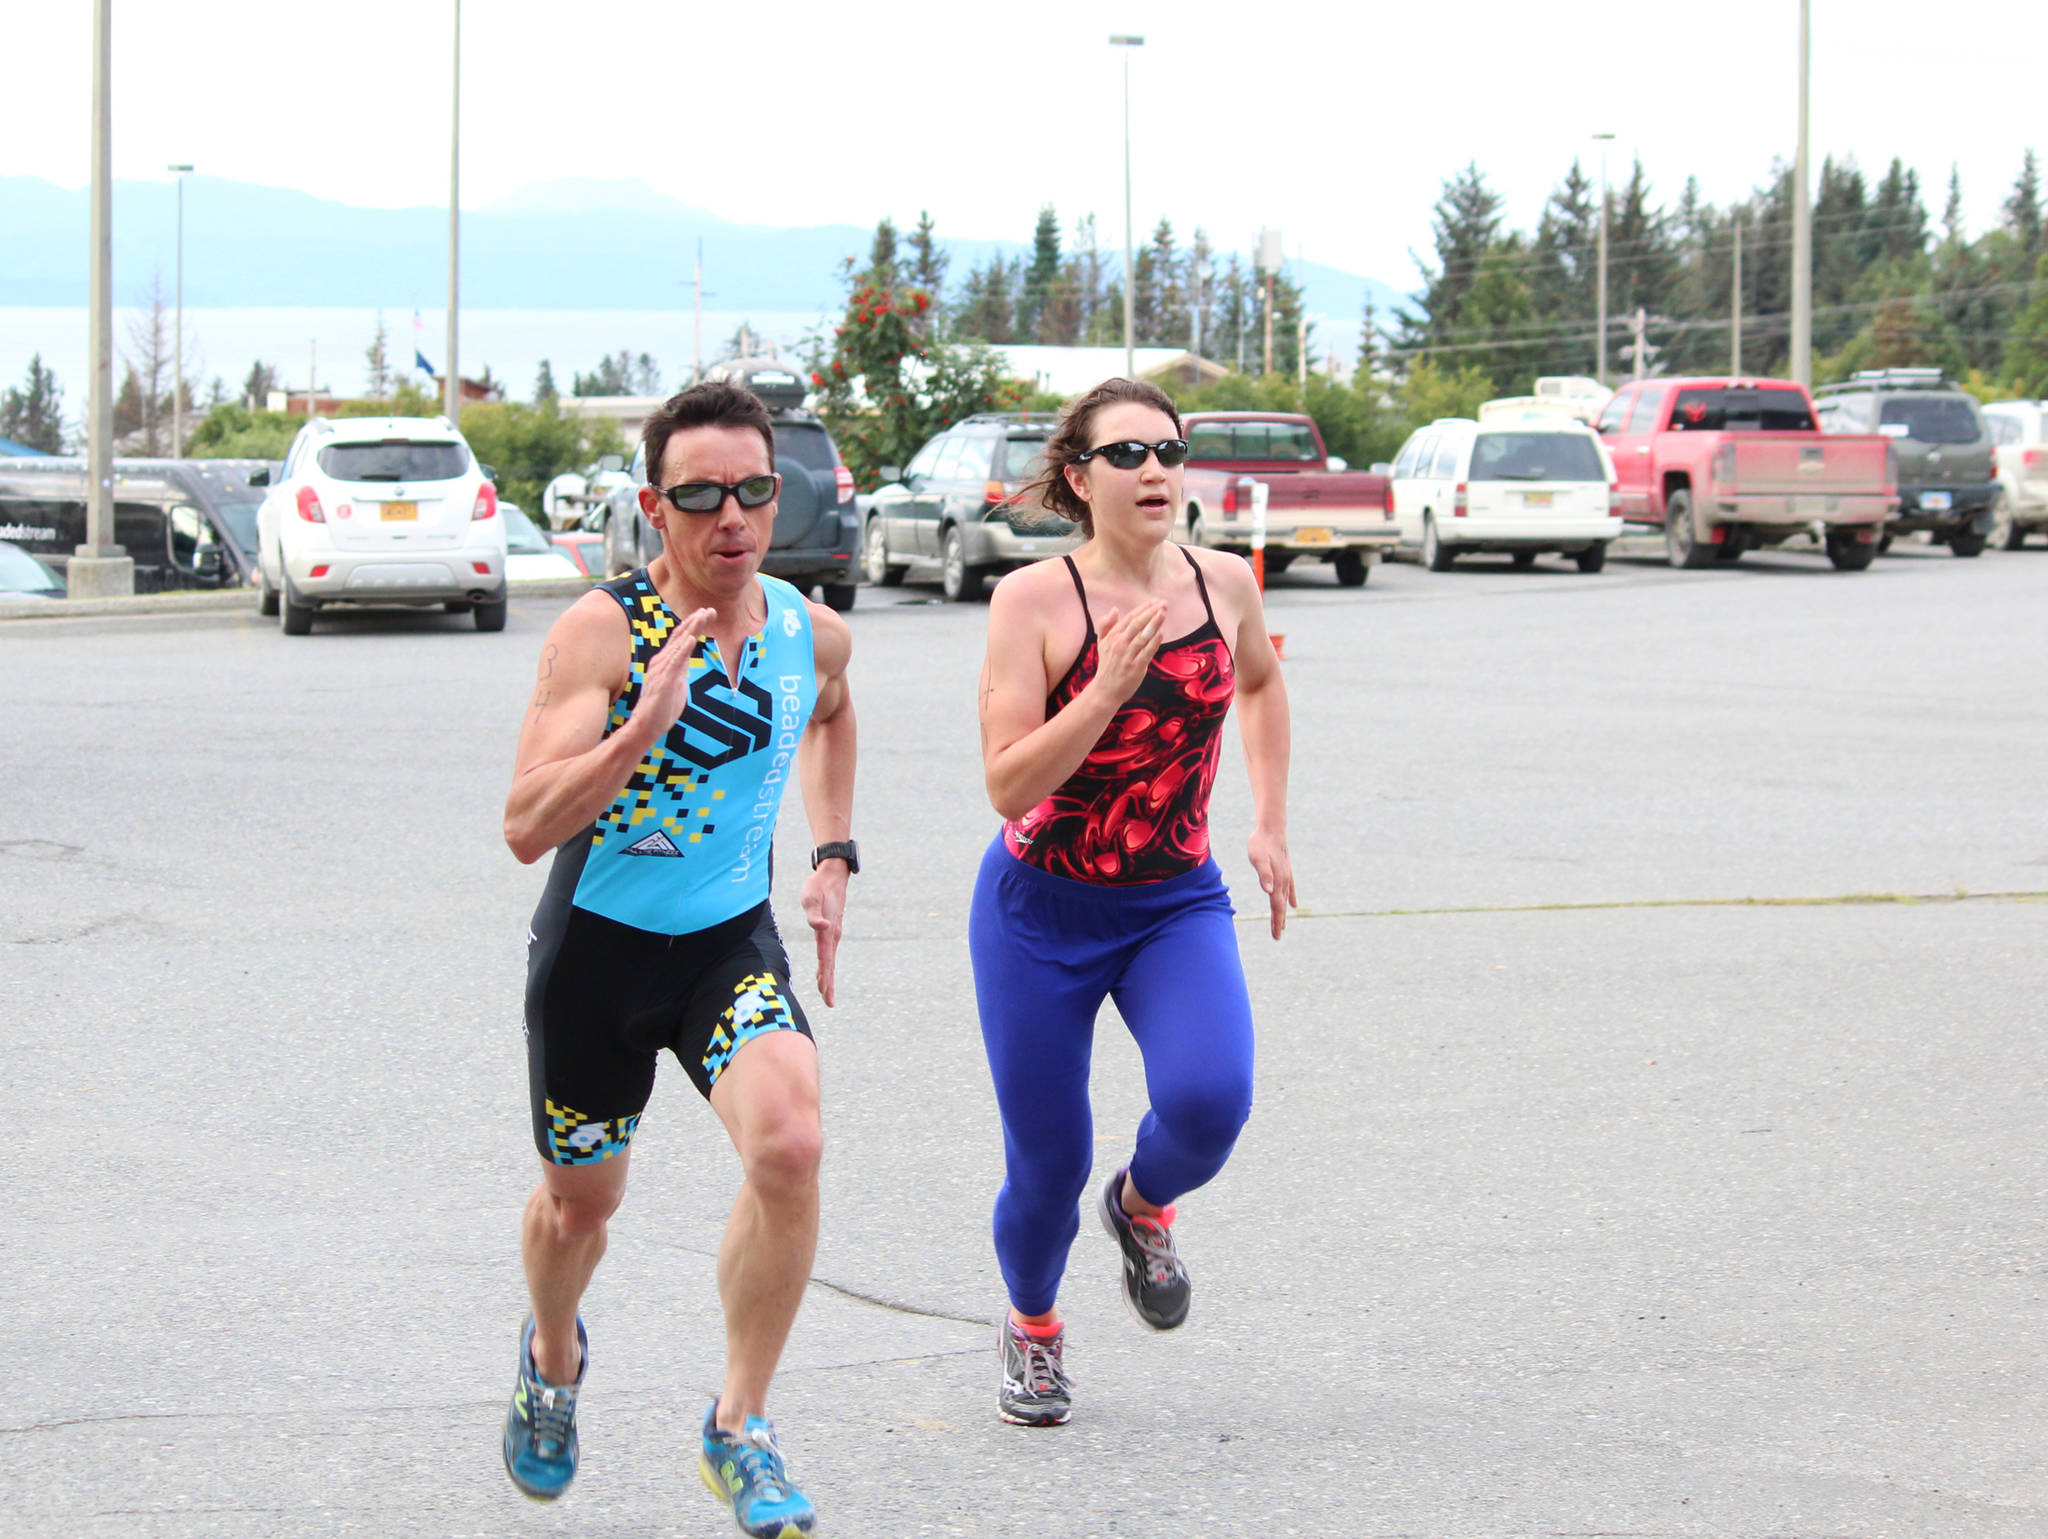 Anchorage resident Brian Shumaker and Kristin Faulkner, who used to swim for Homer High School before she went to college and then moved to New York, race each other to the finish line of the Homer Mariner Triathlon at Homer High School on Saturday, Sept. 2, 2017 in Homer, Alaska. The two remained on each other’s tail throughout much of the race before Shumaker passed Faulkner at the last second to claim first overall. (Photo by Megan Pacer/Homer News)